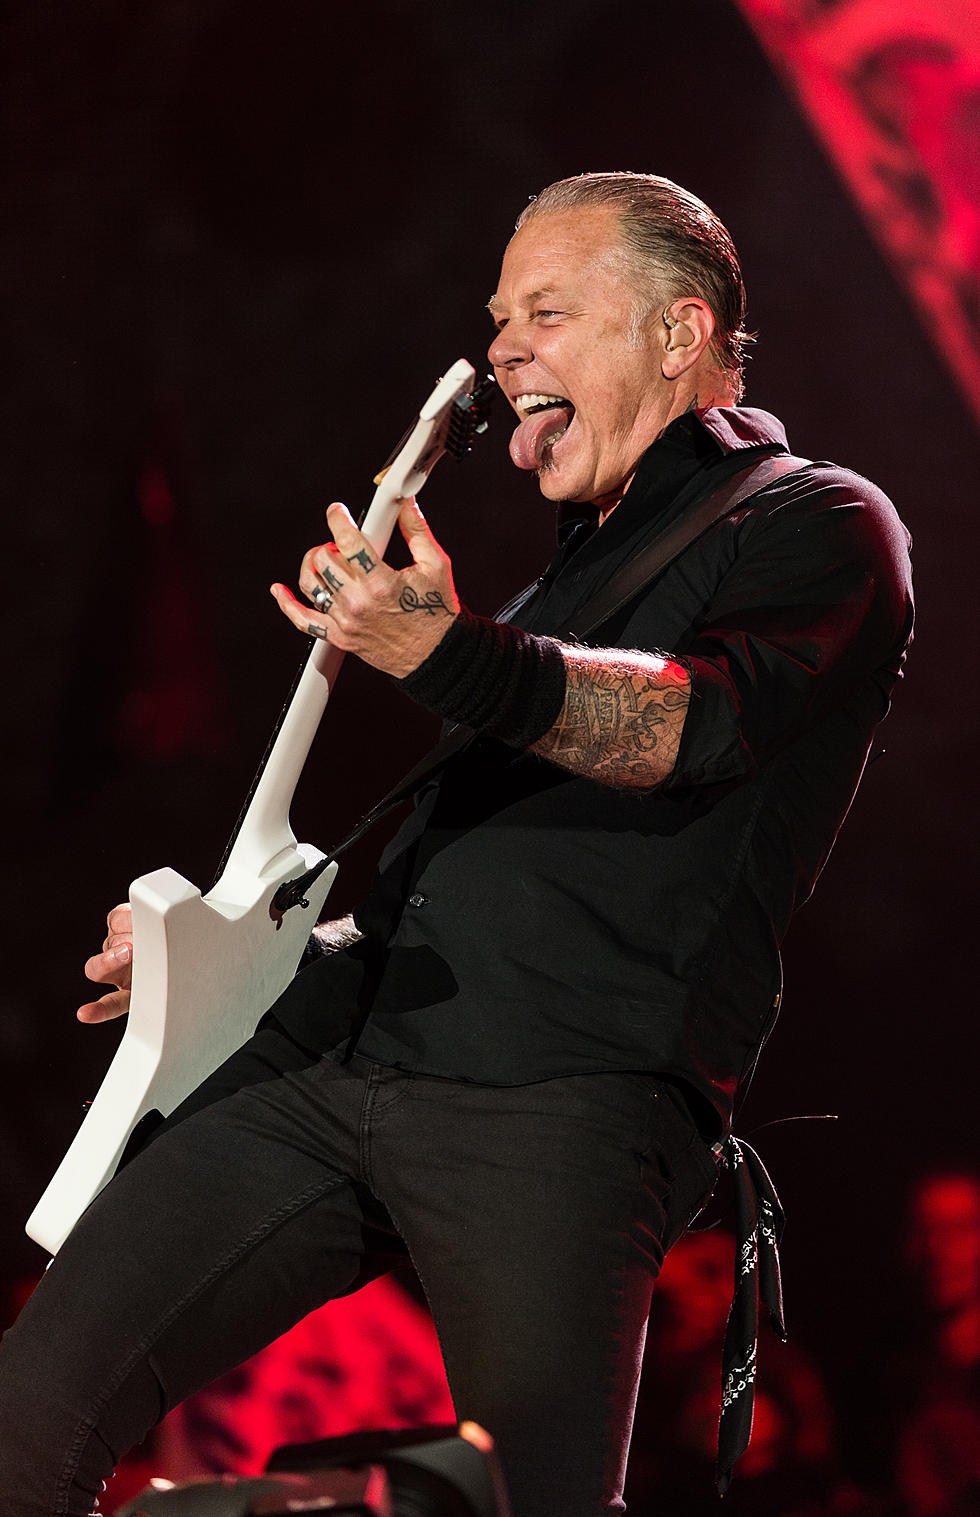 Metallica Is Releasing How Many Live Albums?